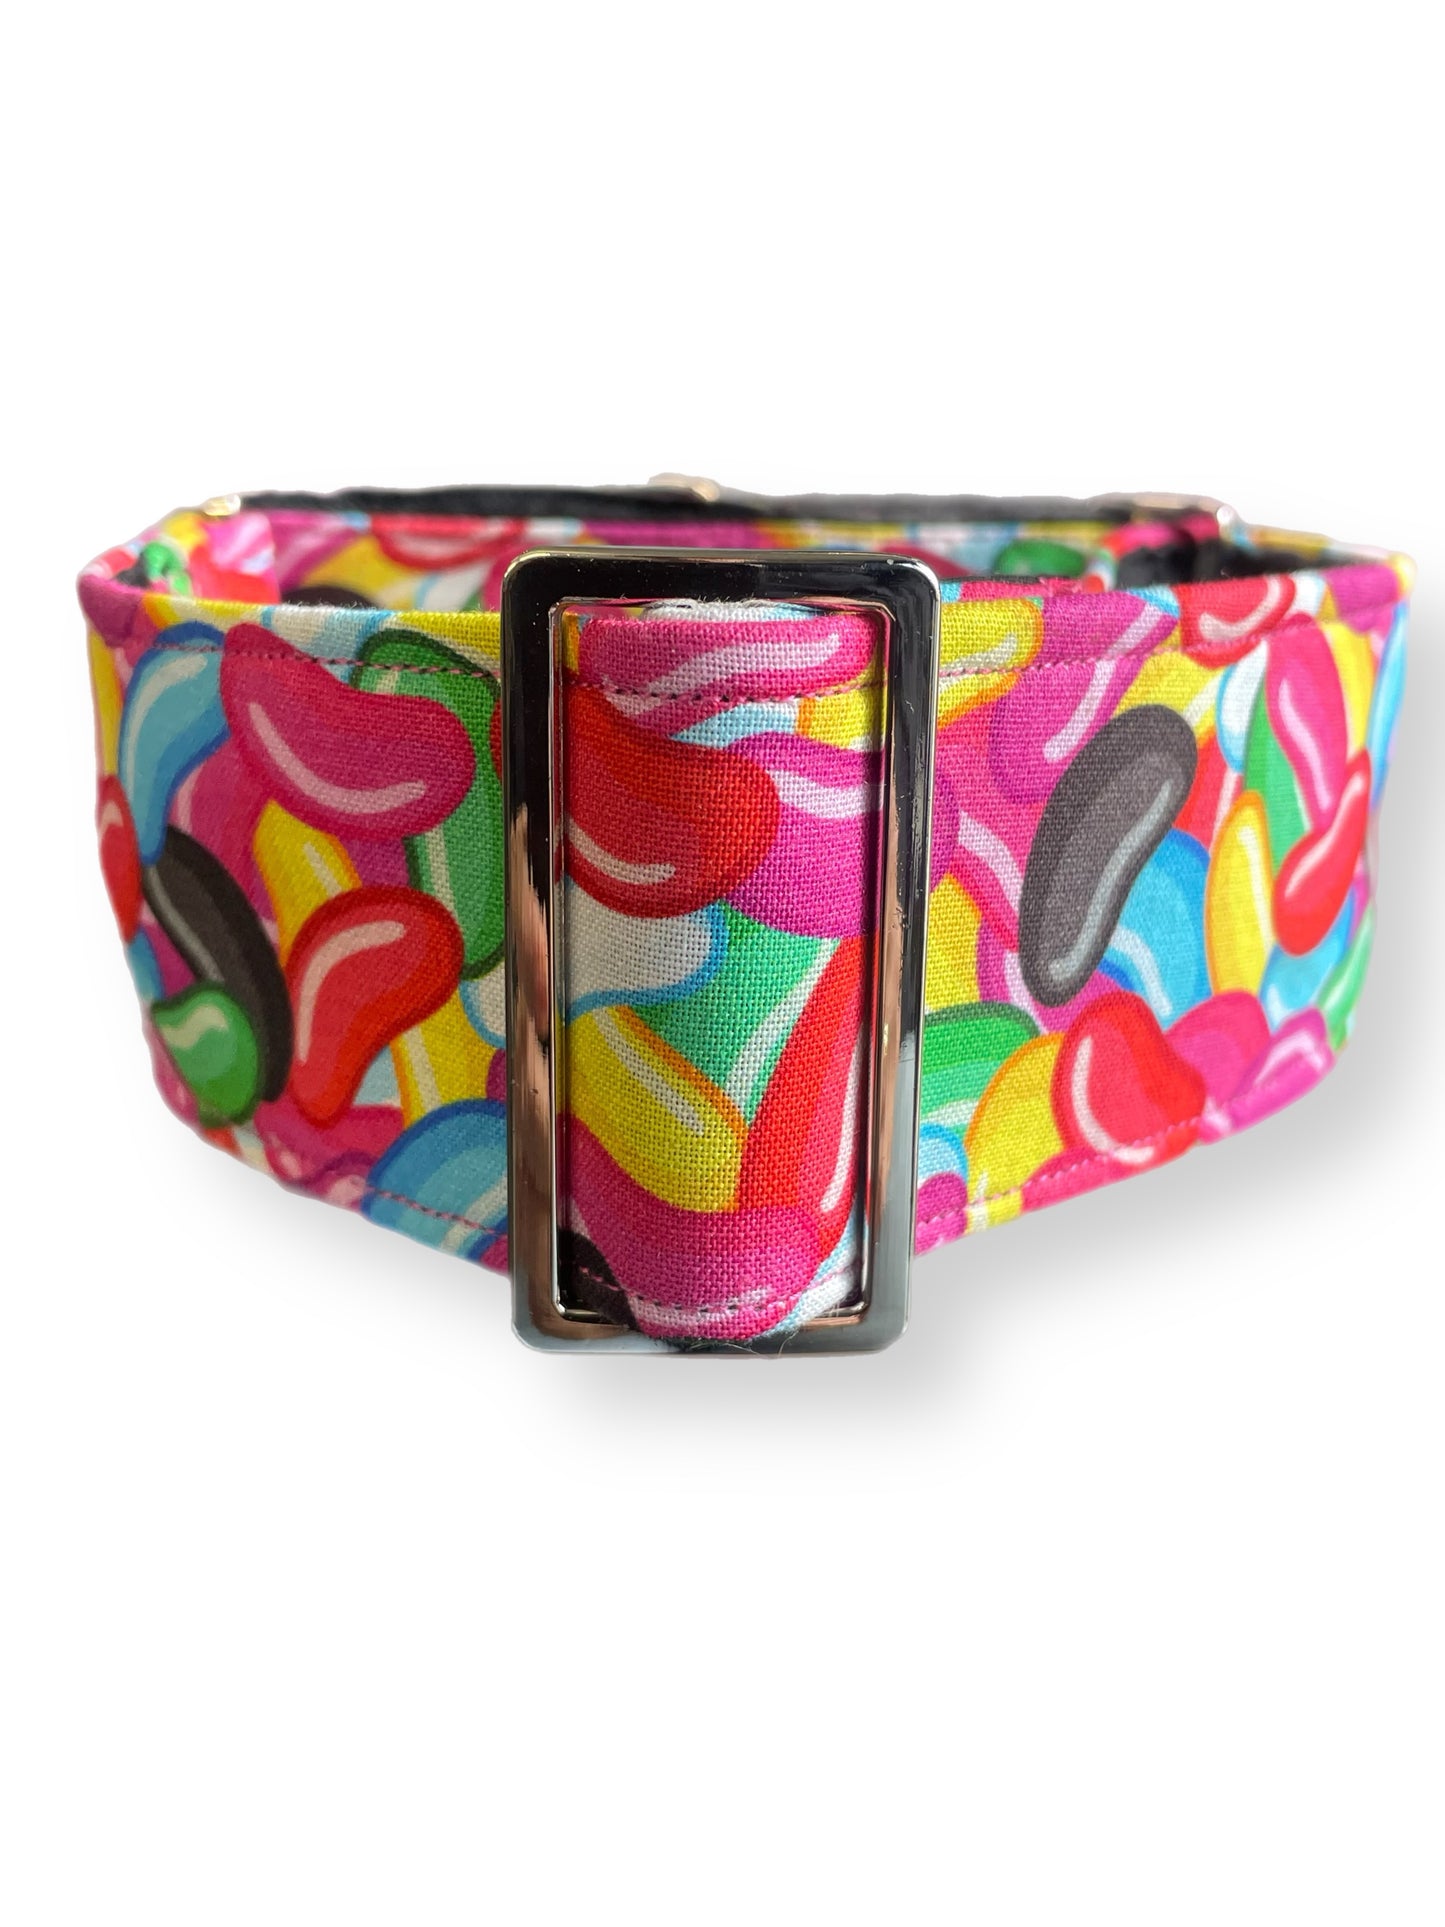 Jelly beans design in bright colors greyhound whippet wide Martingale collar cotton covered super soft